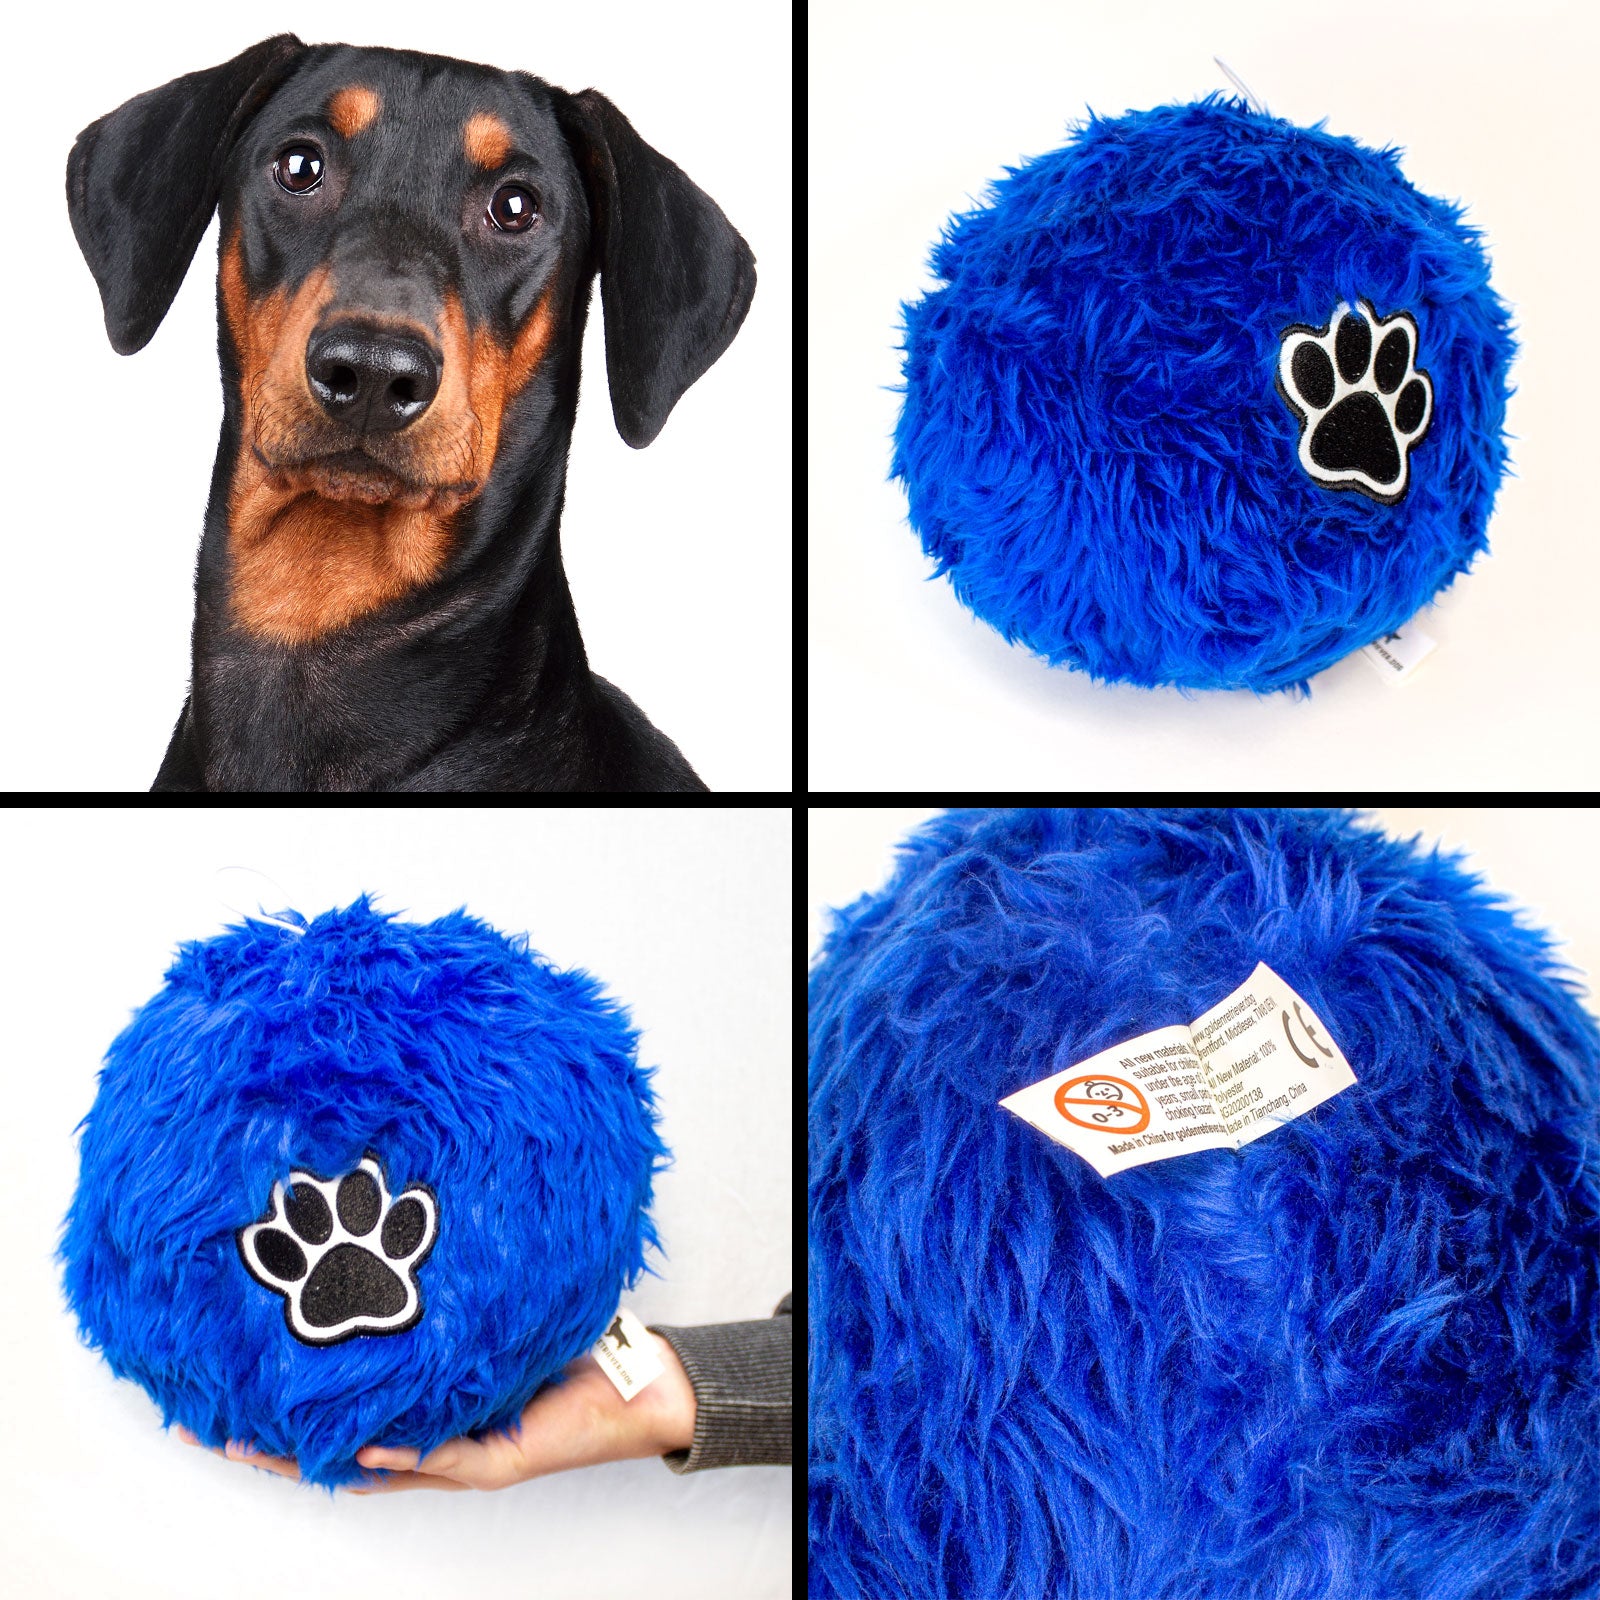 Soft Fluffy Ball For Doberman Dogs - Large Size